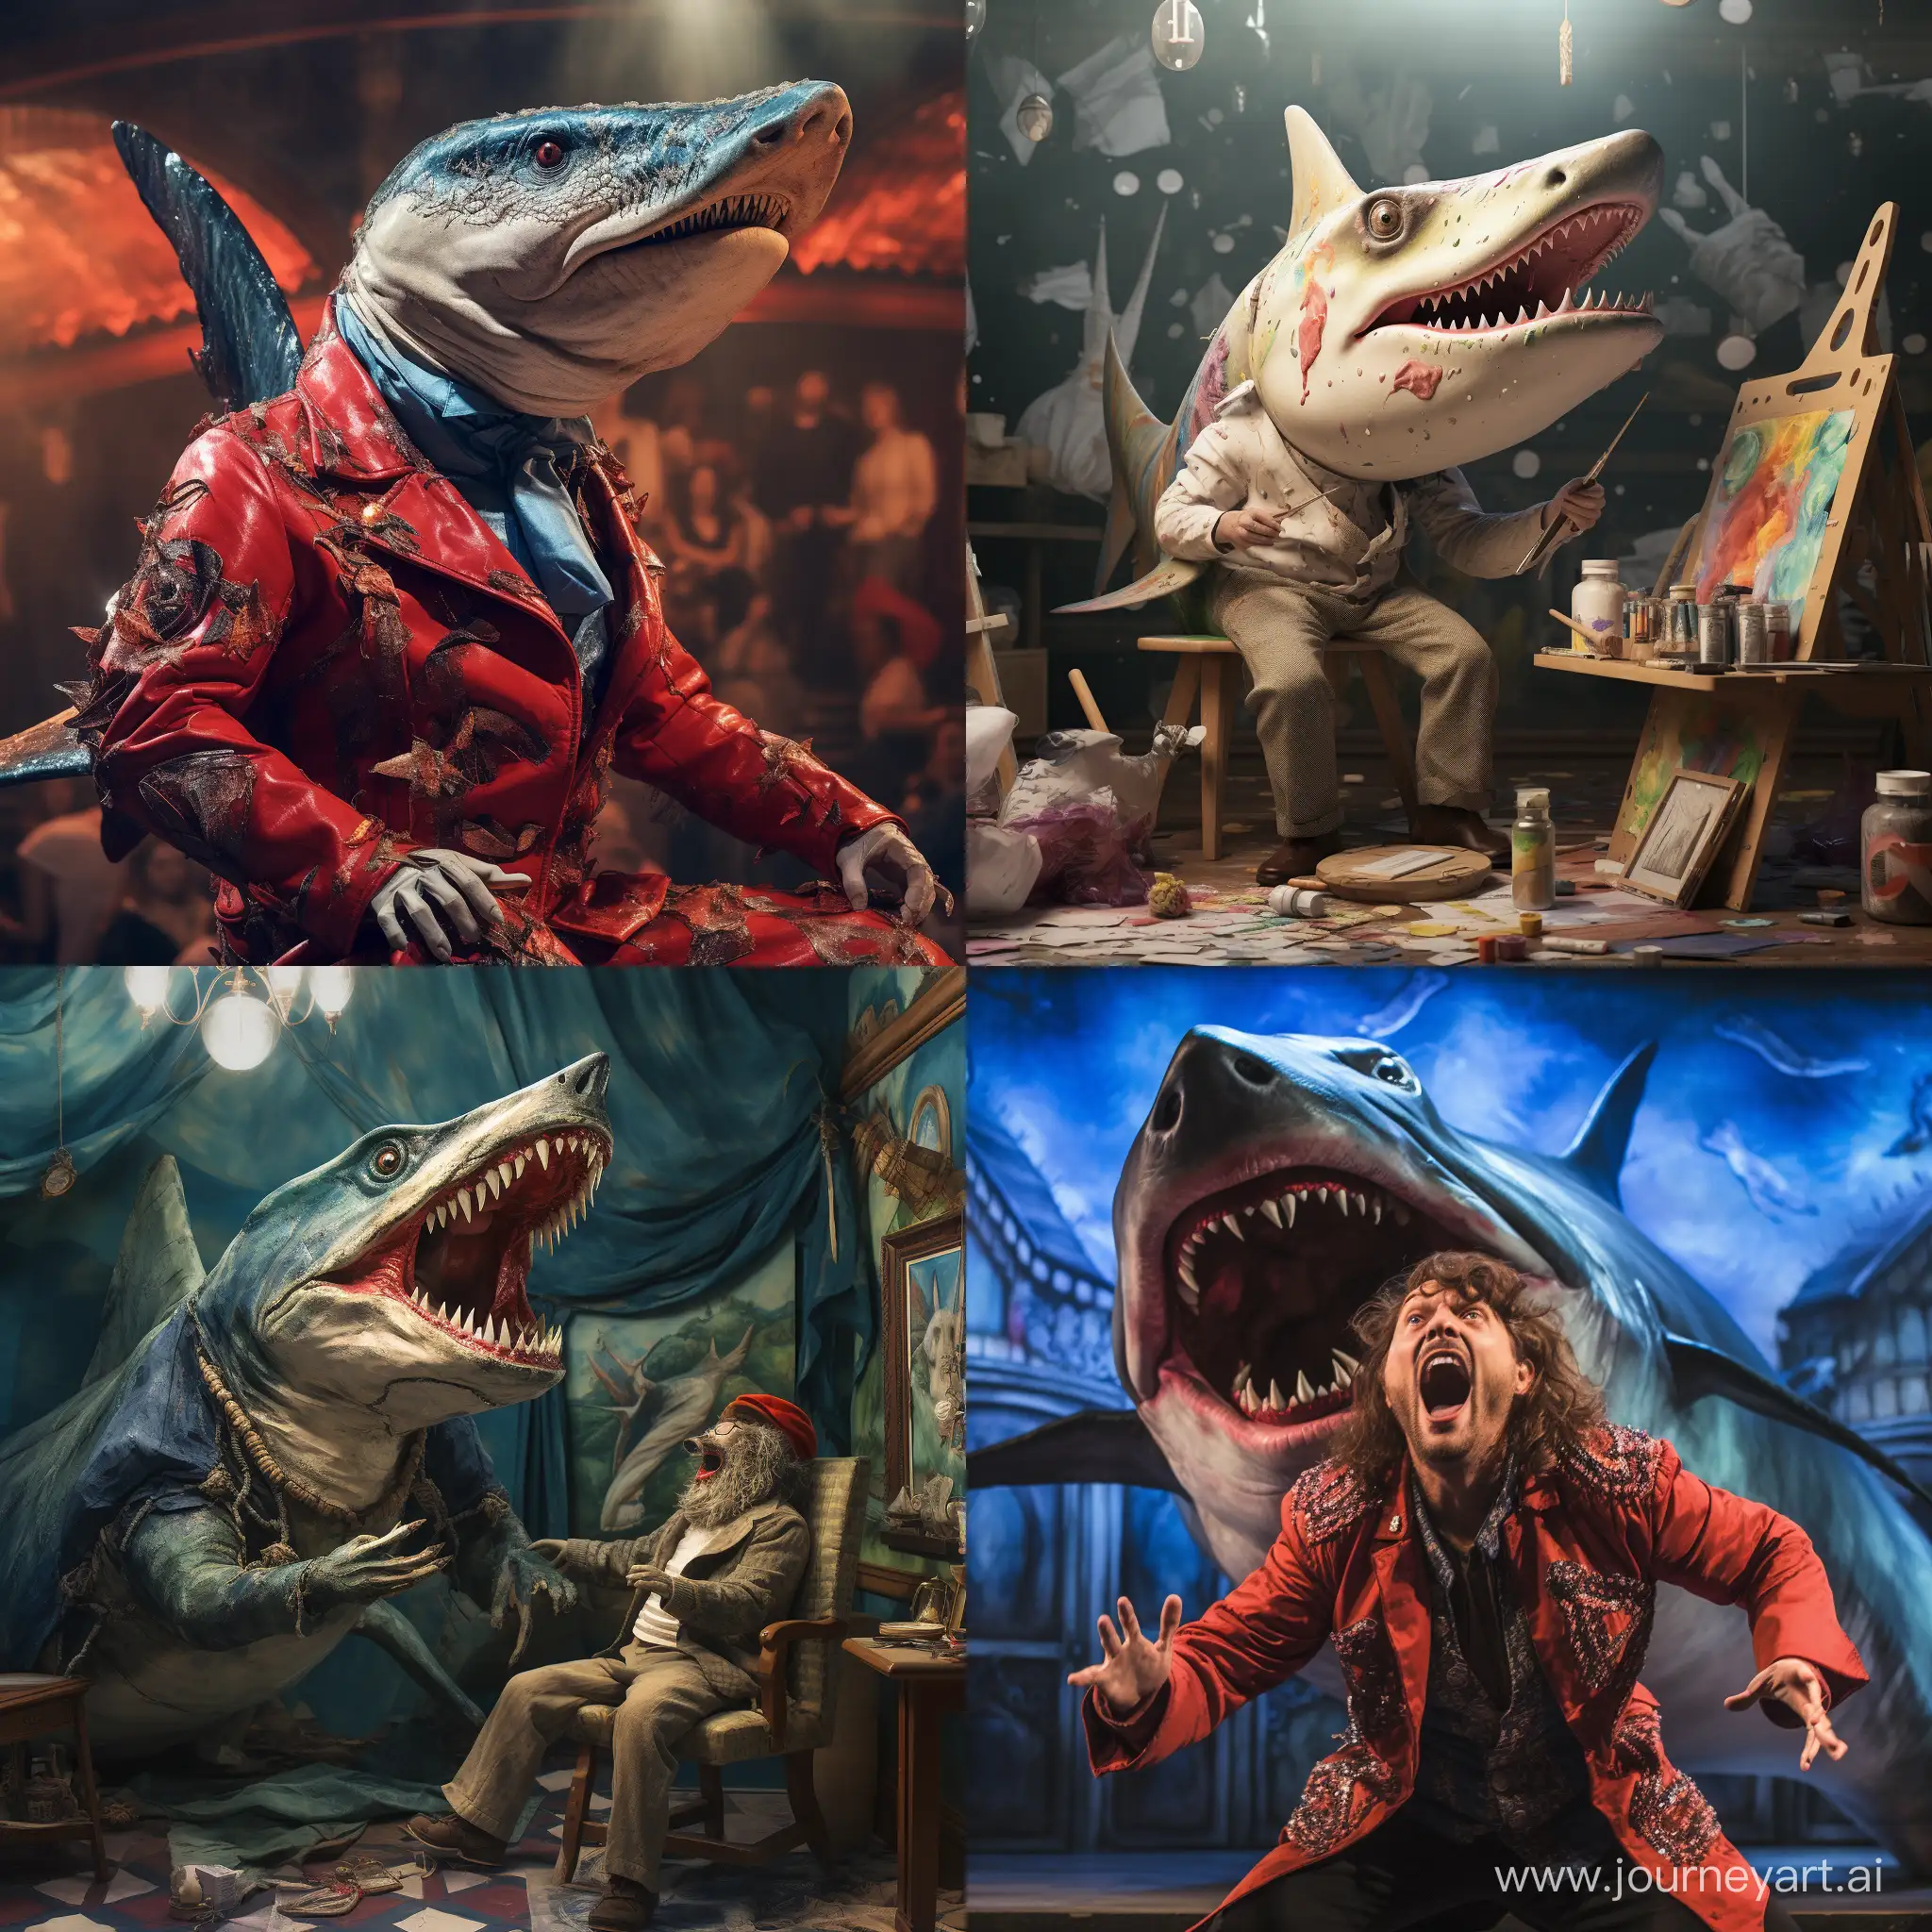 Theatrical-Painted-Shark-in-Captivating-11-Aspect-Ratio